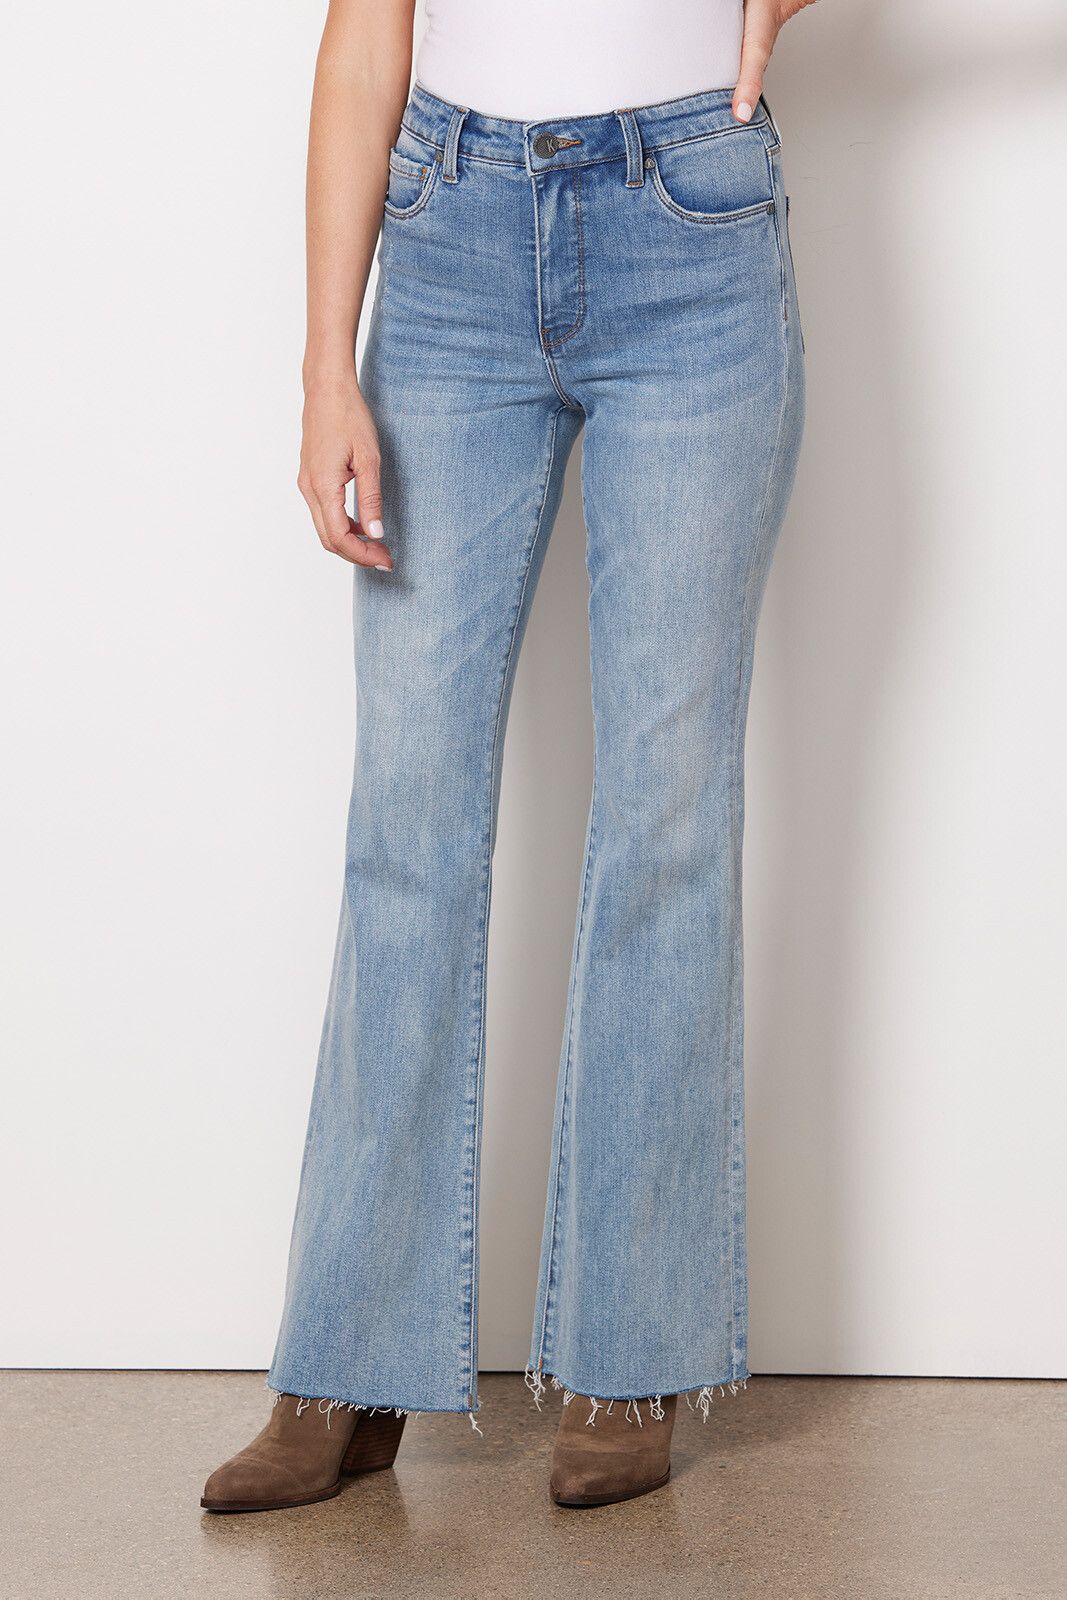 KUT FROM THE KLOTH Ana High Rise Flare Jean | EVEREVE | Evereve